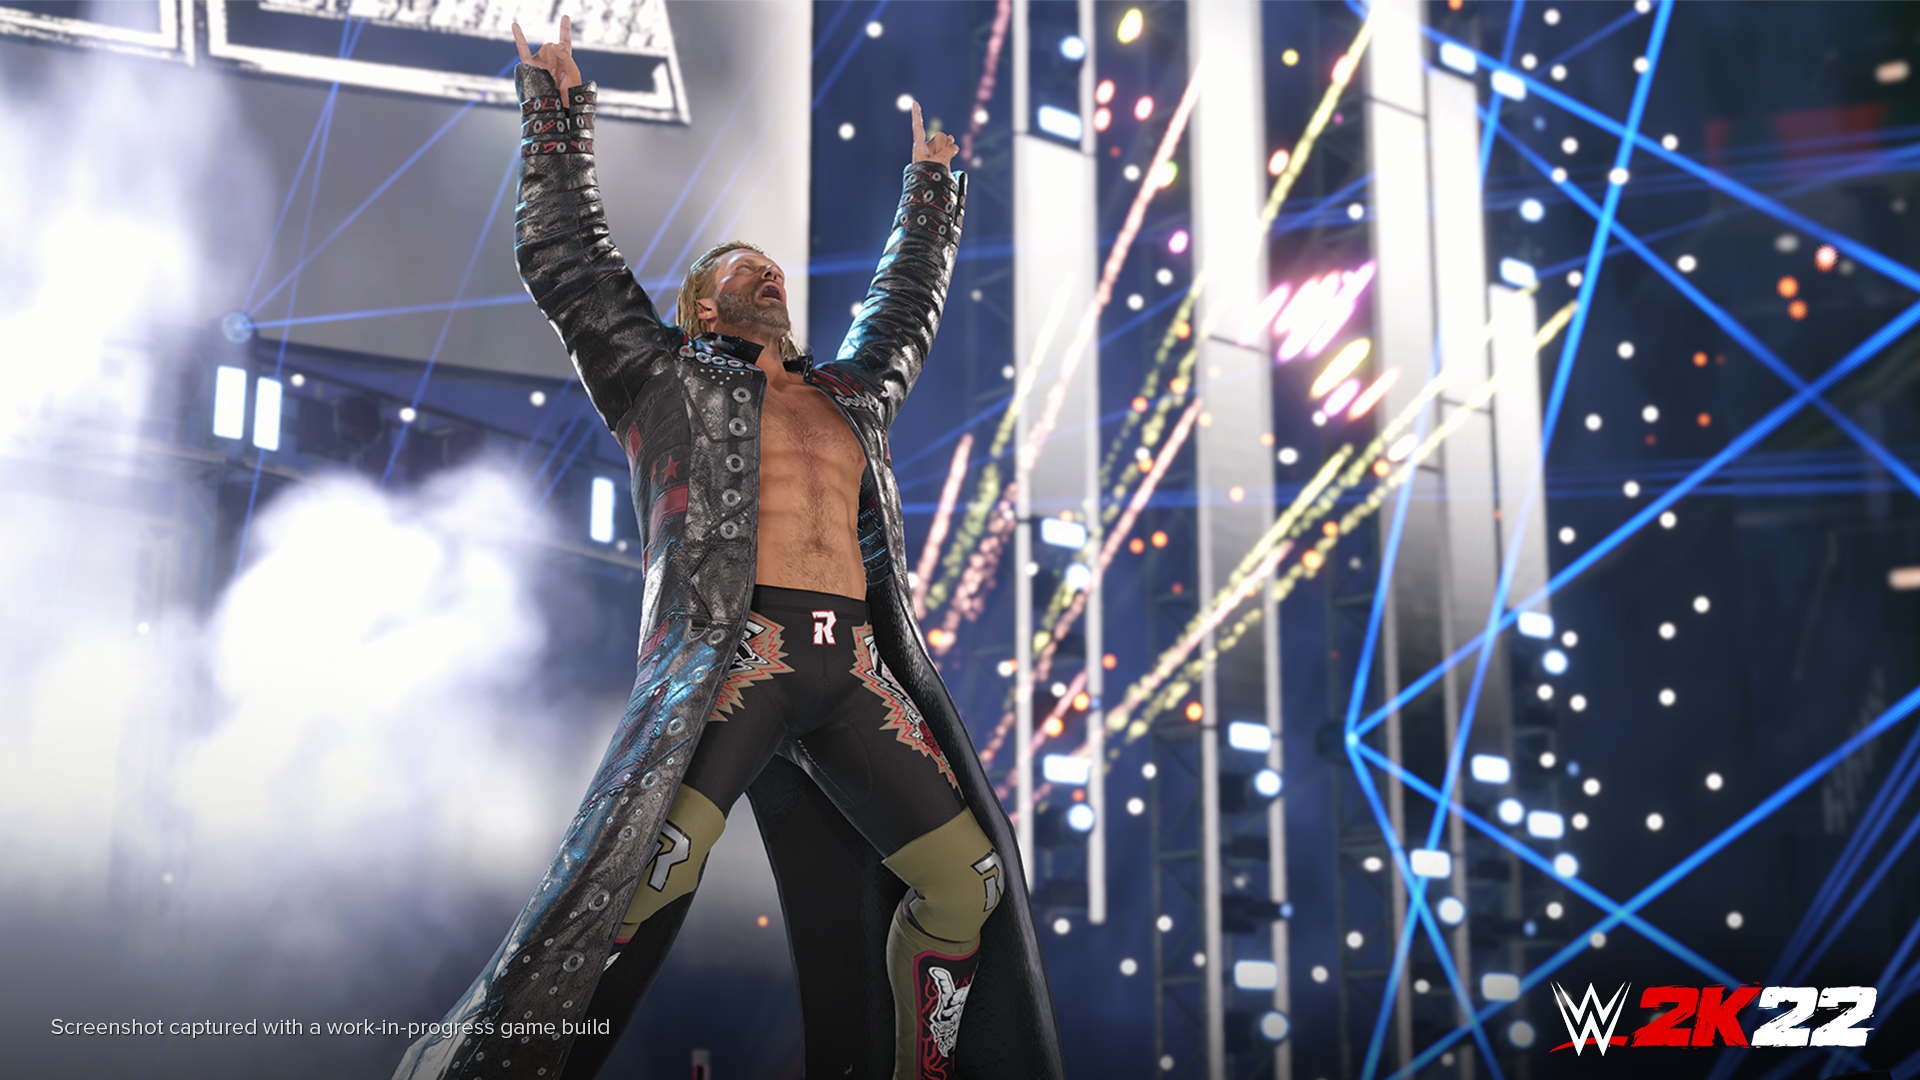 the pro rassler Edge, making a stage entrance in WWE 2k22